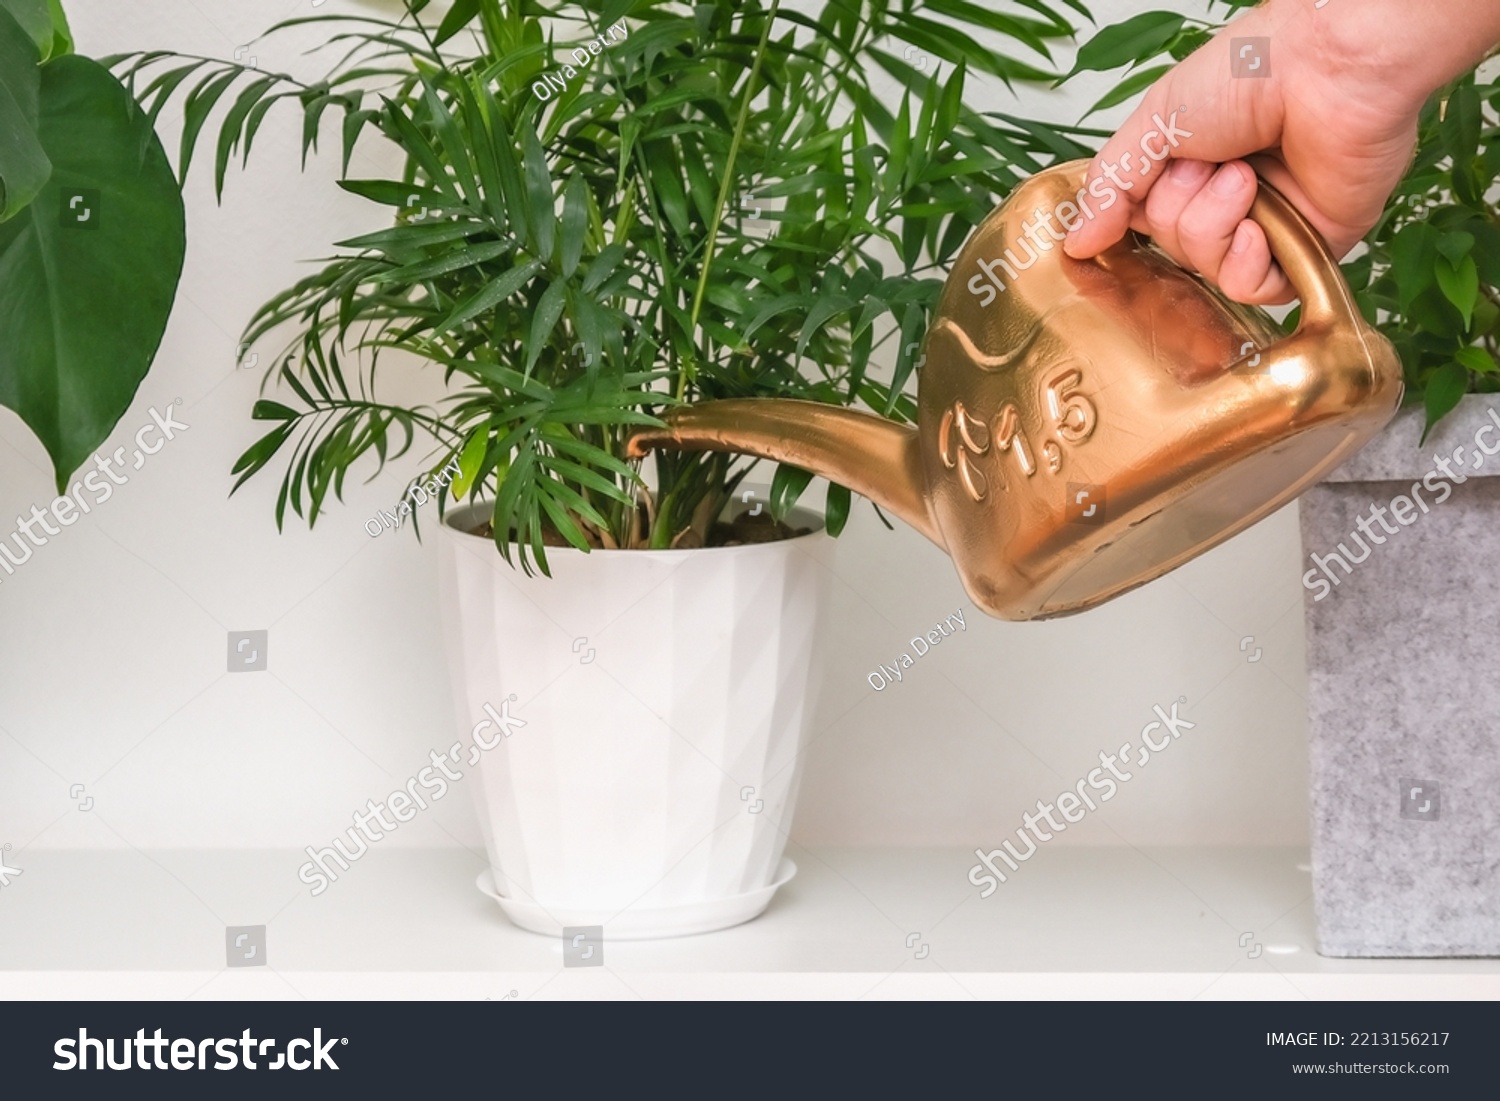 A man pours water from a plastic watering can Chamaedorea elegans, Neanthe bella, Parlour Palm. Watering of domestic plants. Home garden. Parlor Palm. #2213156217